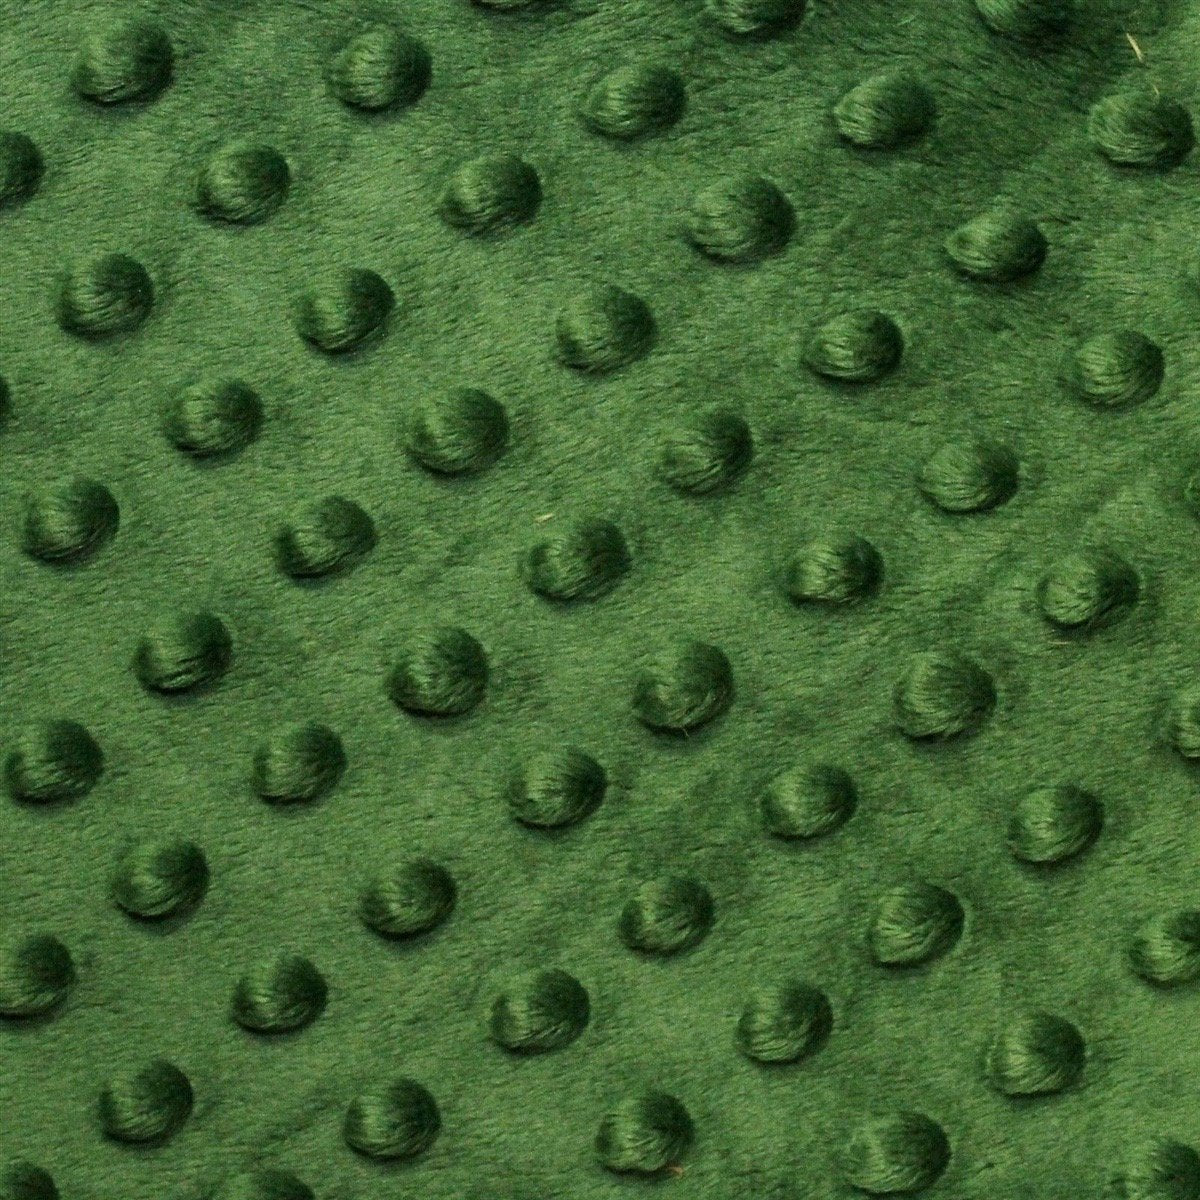 Alison HUNTER GREEN Embossed Dimple Dots Soft Velvety Faux Fur Fabric by the Yard - 10090